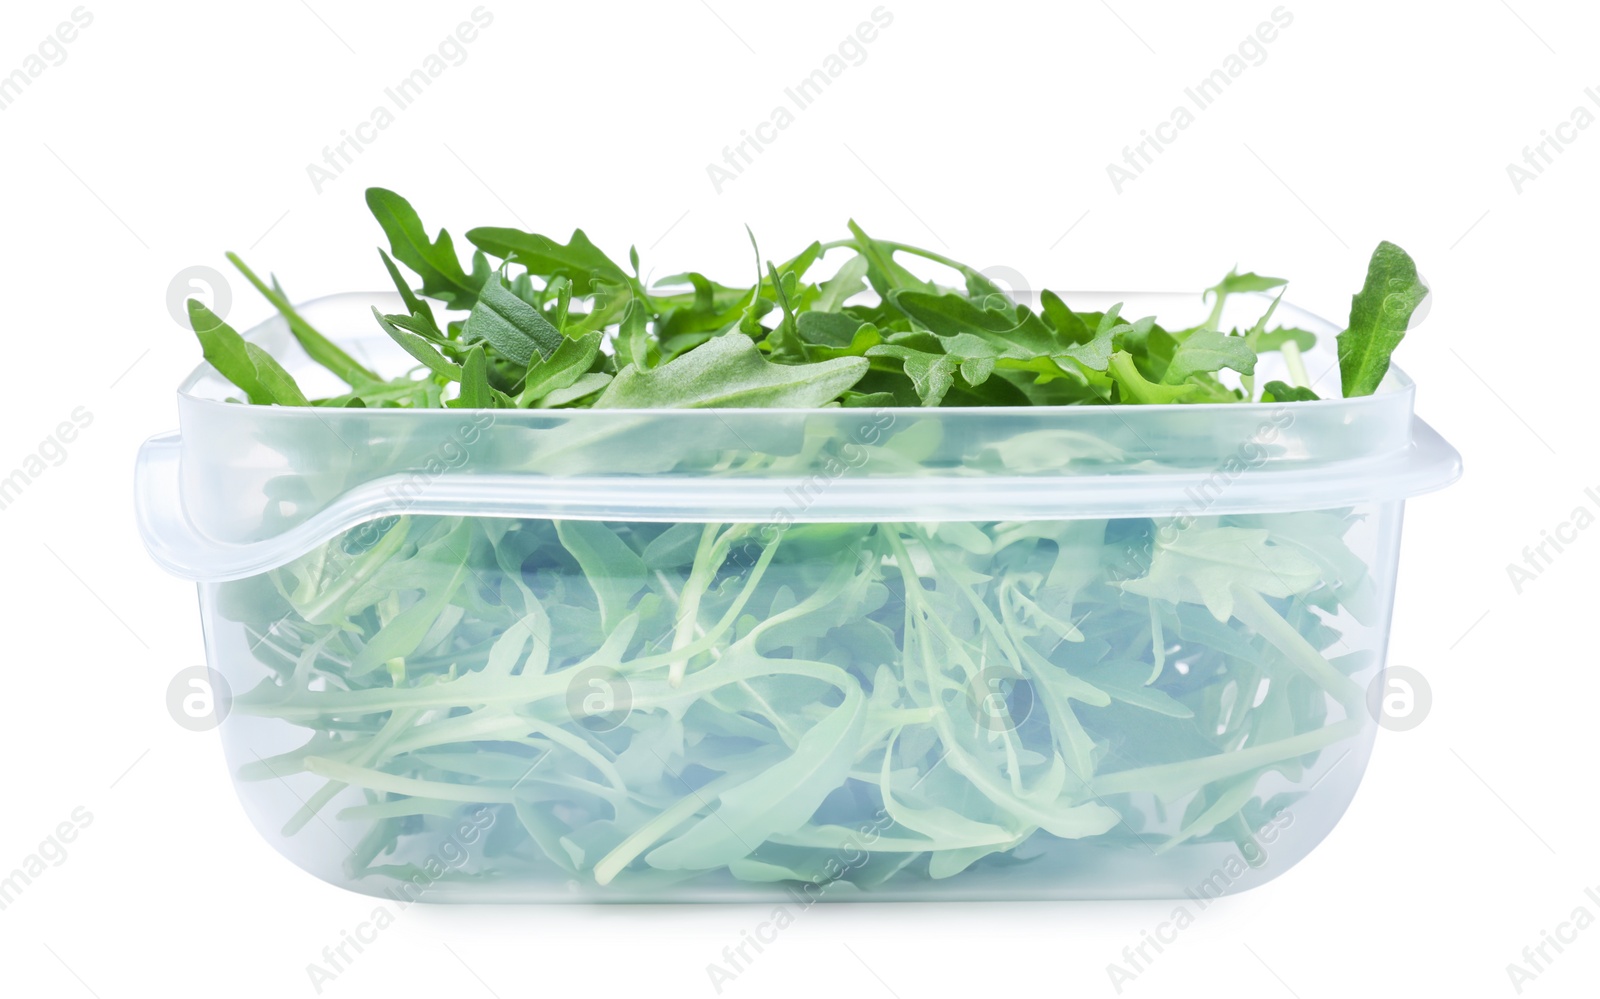 Photo of Fresh arugula in plastic container isolated on white